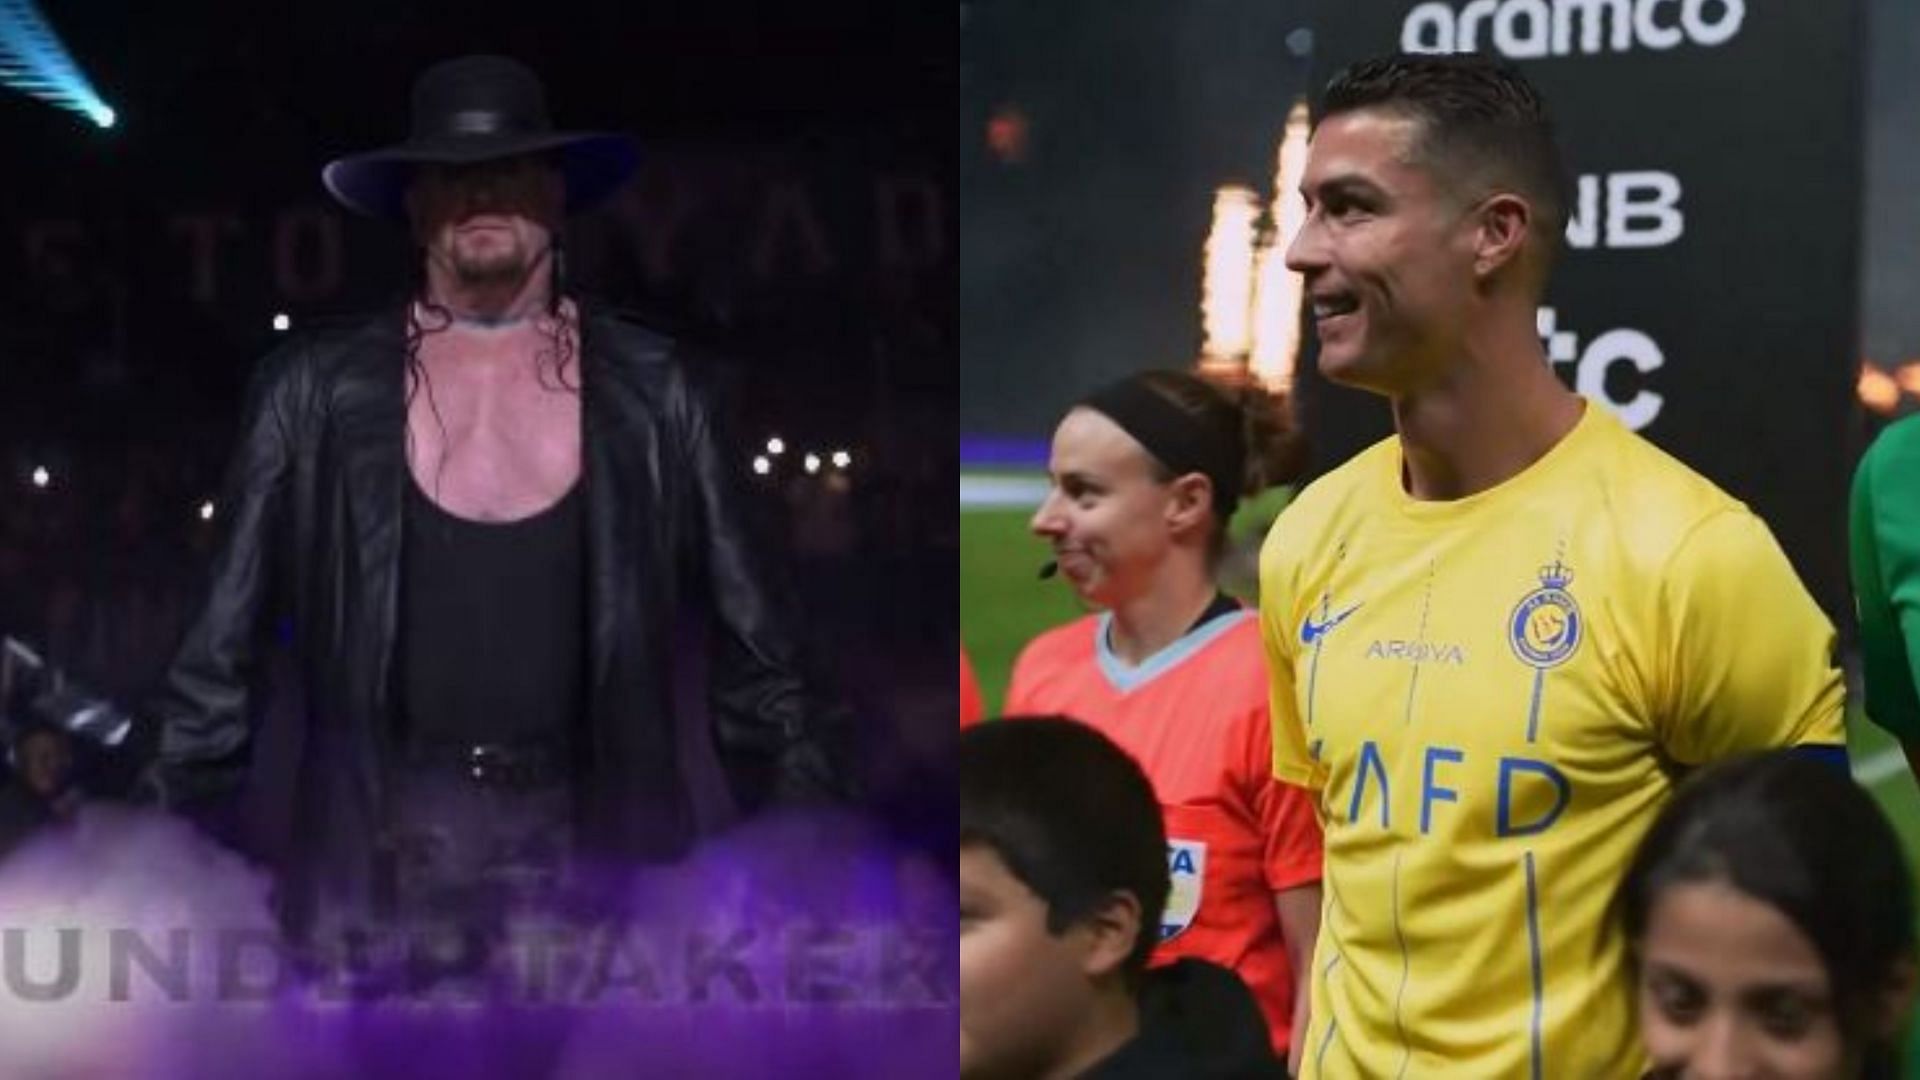 WWE Hall of Famer The Undertaker (left) and Cristiano Ronaldo (right)